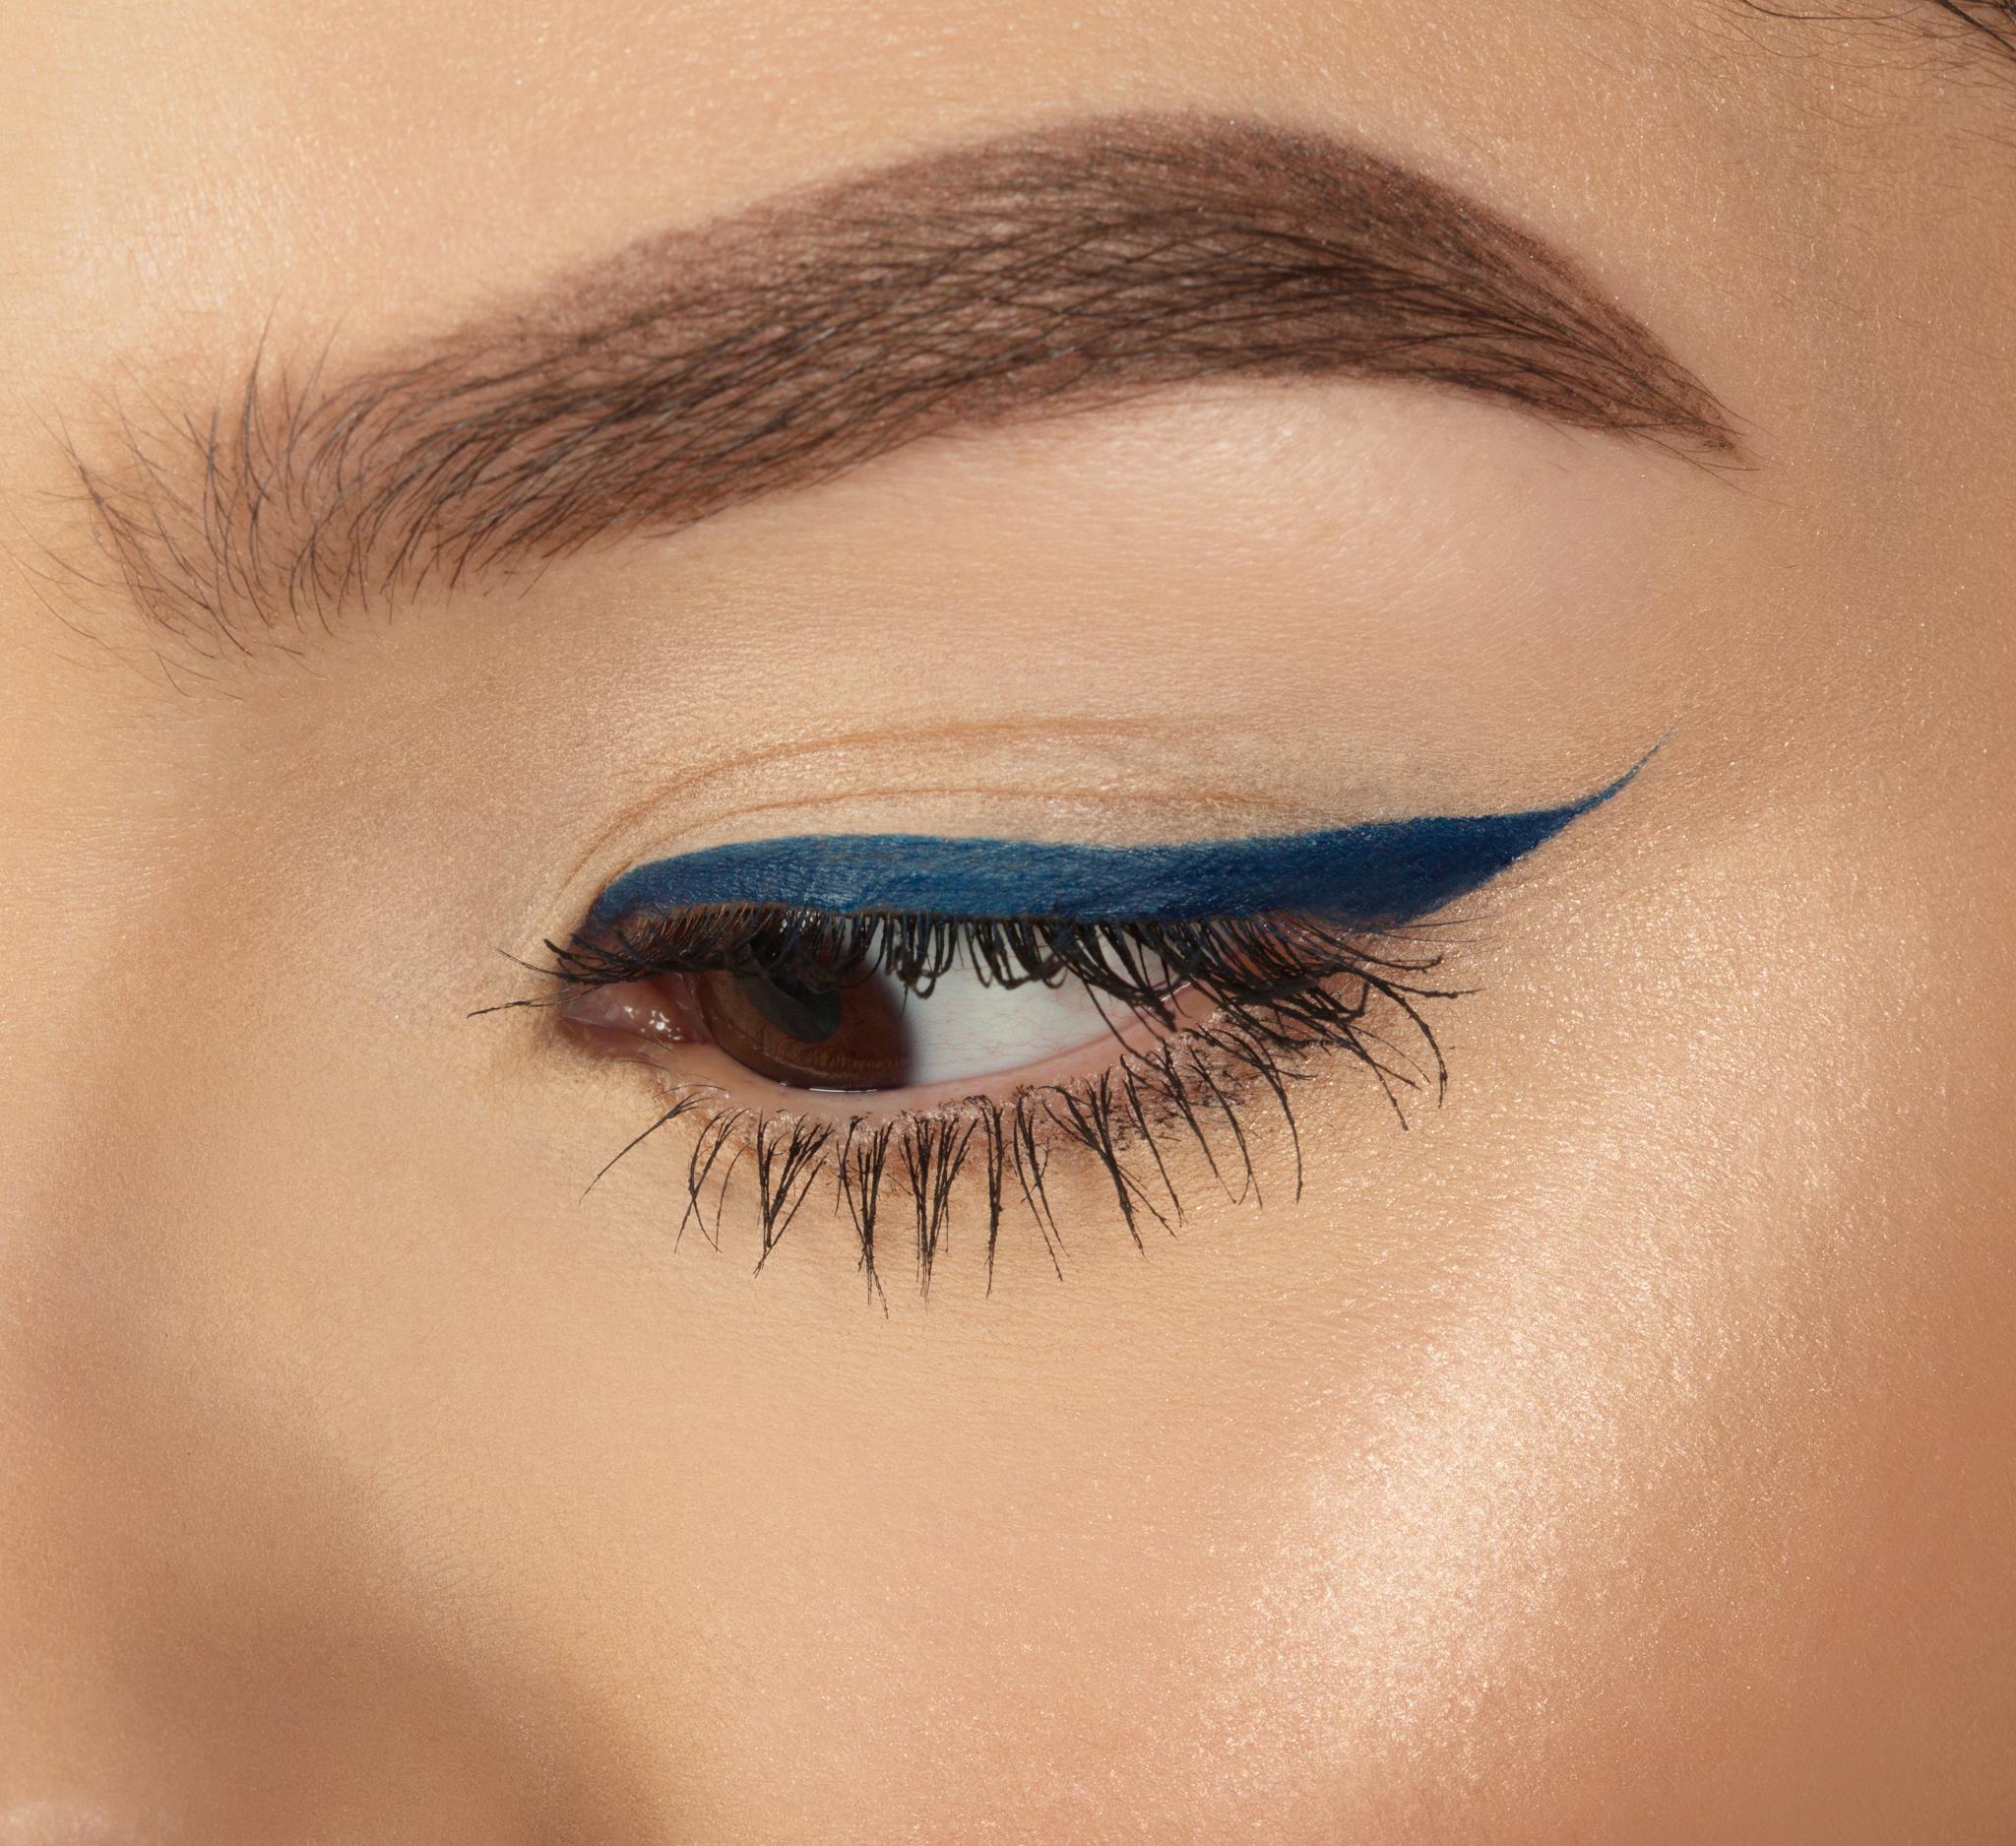 Maybelline New York on Twitter: "@A1DLT Created a razor-sharp cat eye with  our NEW #masterprecise all day liquid eyeliner in 'cobalt blue'. This new  liner is waterproof, smudge-proof, and the ultra-fine tip